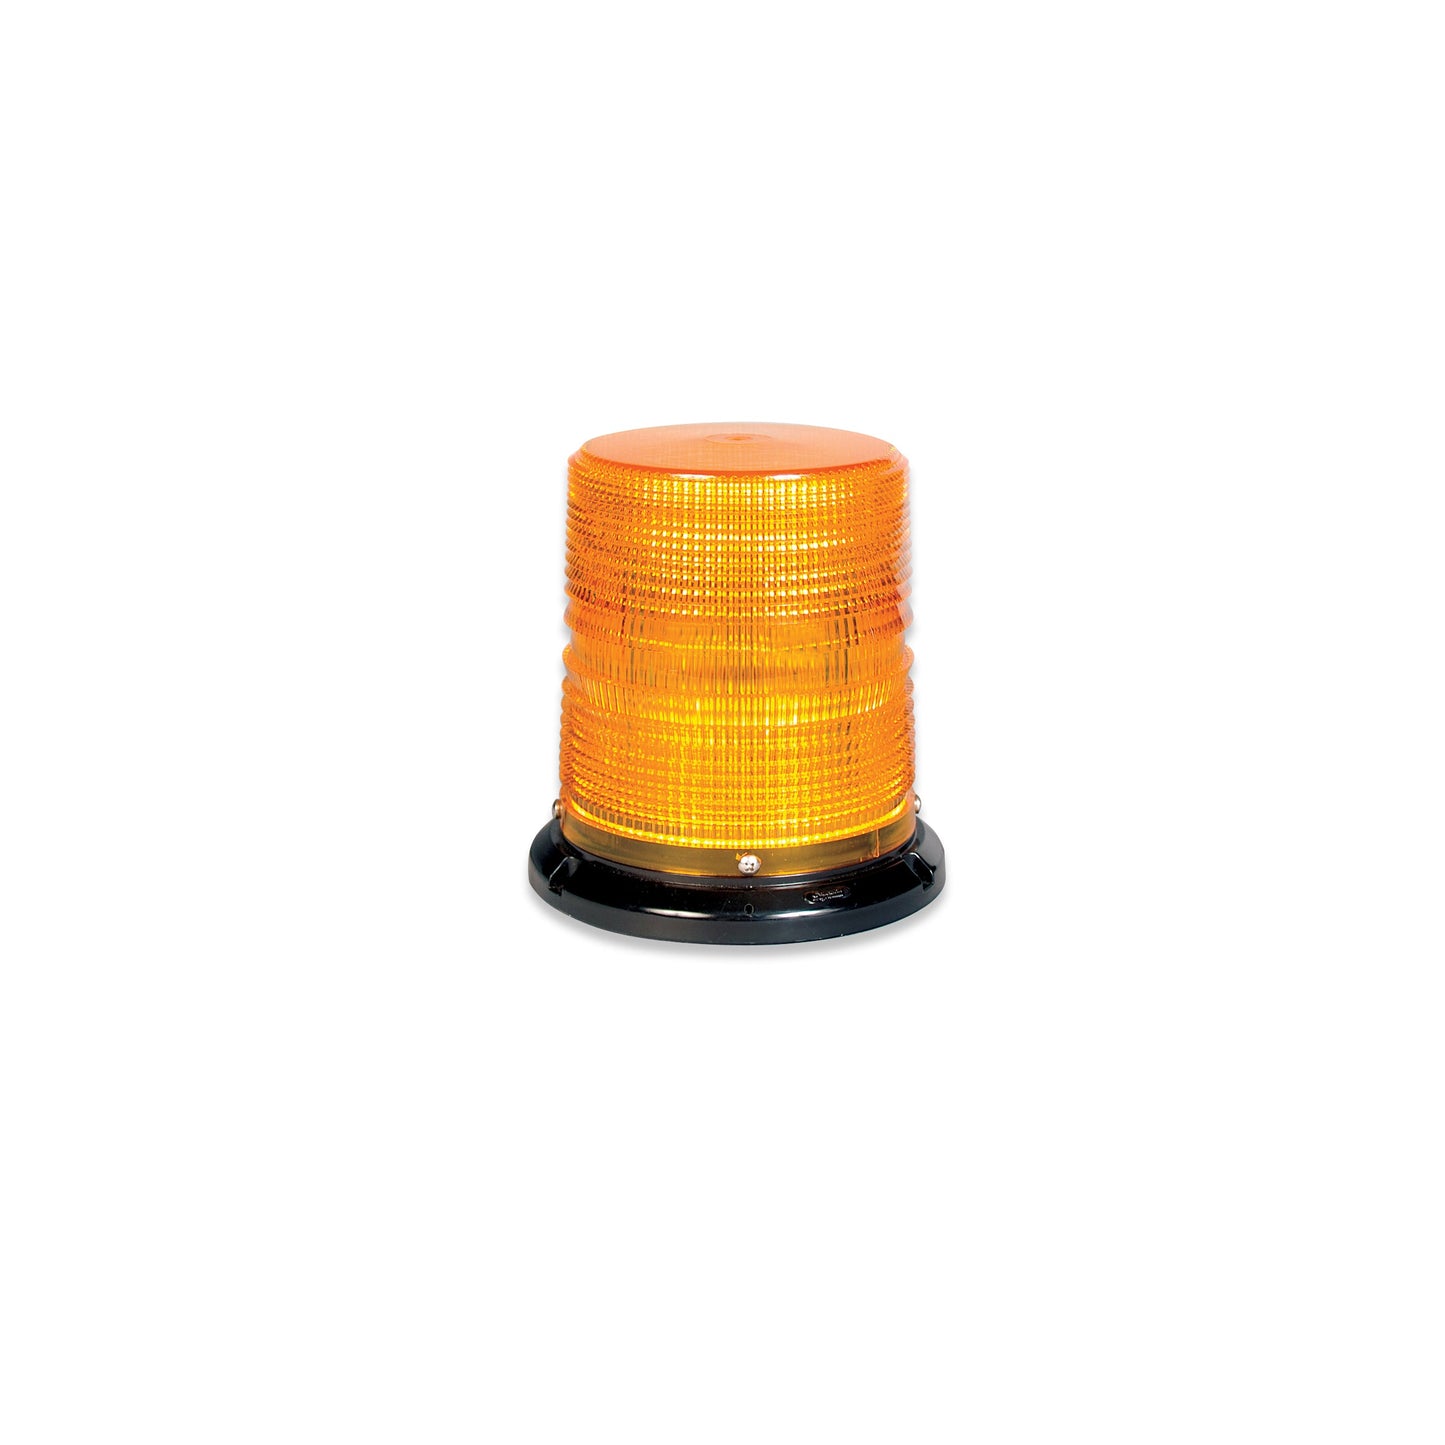 Soundoff Signal ELB45BCH0RC 4500 Series Led Beacon, 10-30V, Sae J845 Class 1 - Flat/Pipe Mount, 6" Clear Dome/ Red Leds